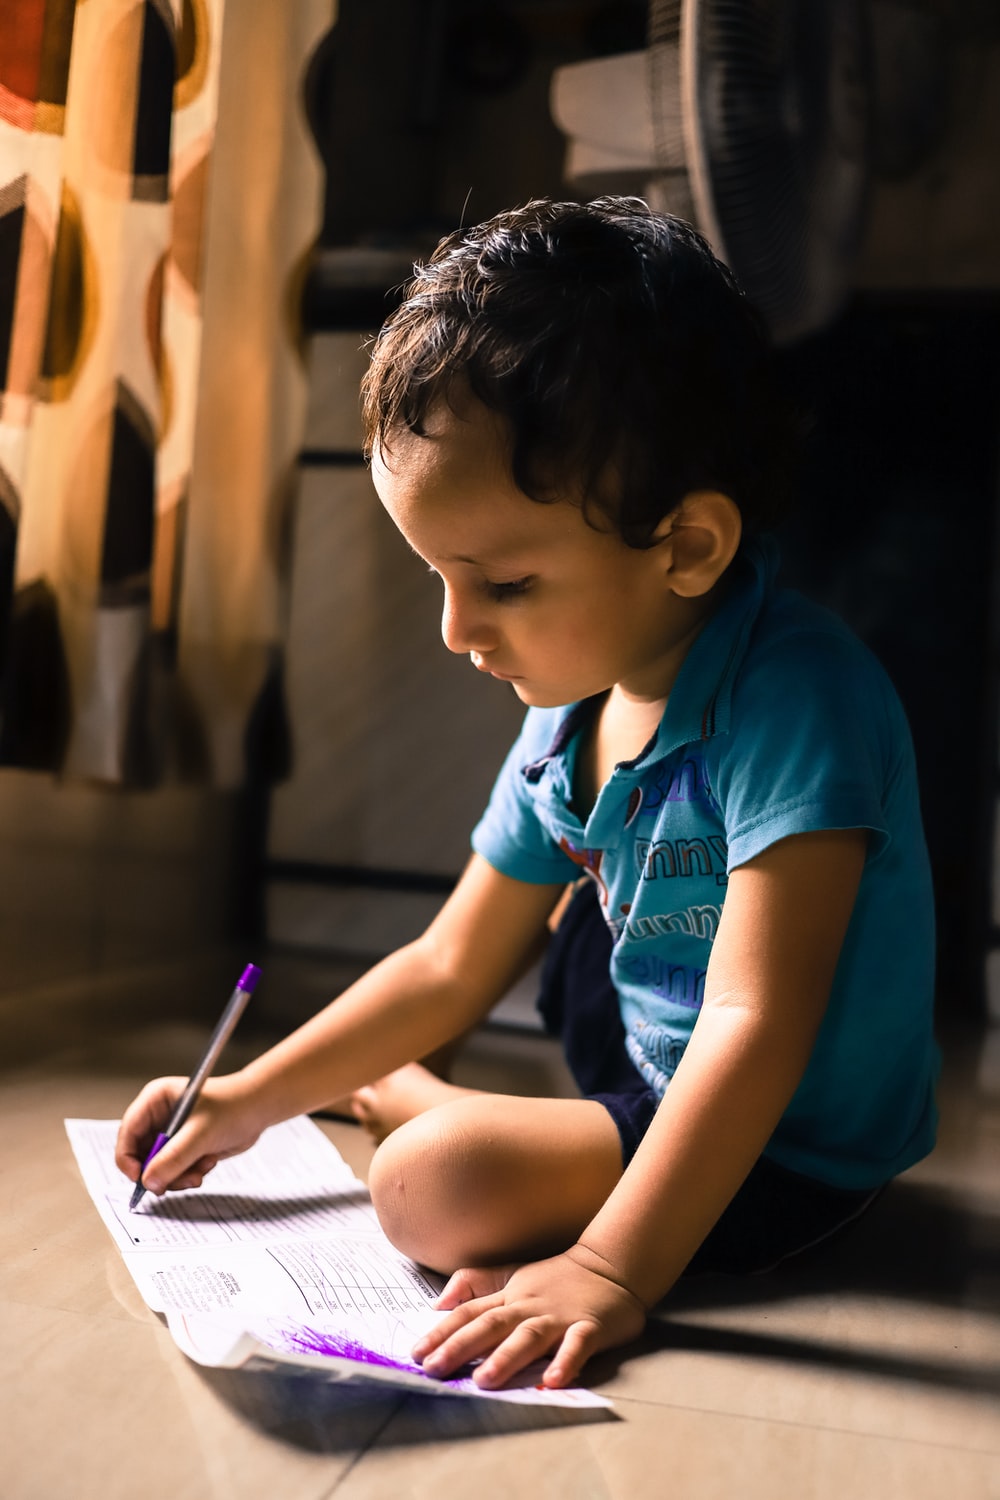 Boy Writing Picture. Download Free Image